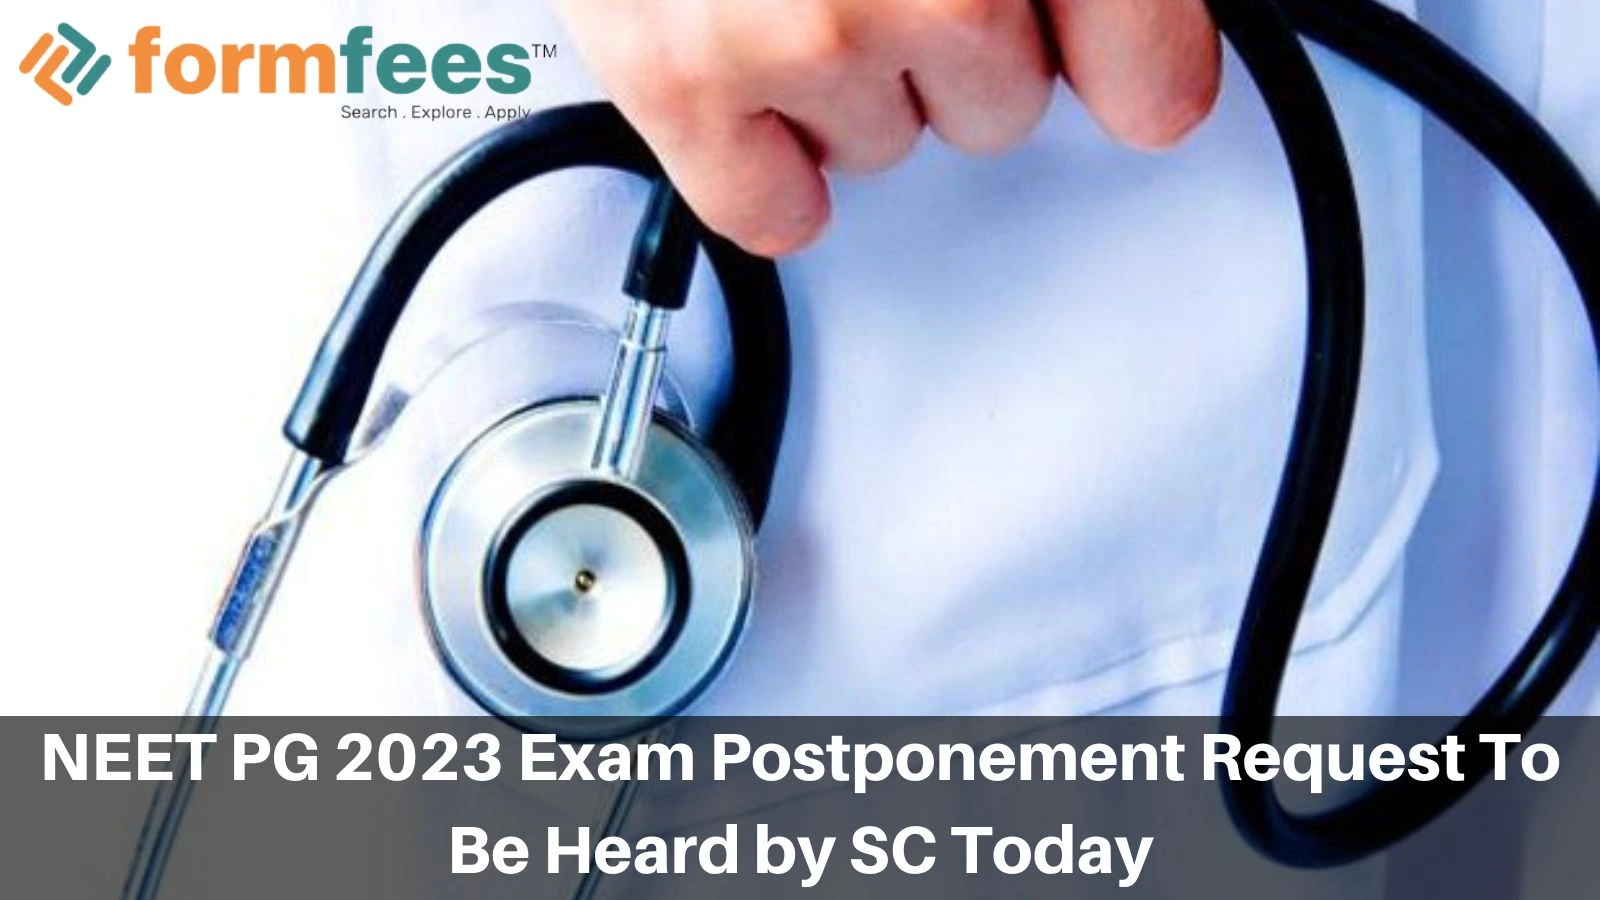 NEET PG 2023 Exam Postponement Request To Be Heard by SC Today